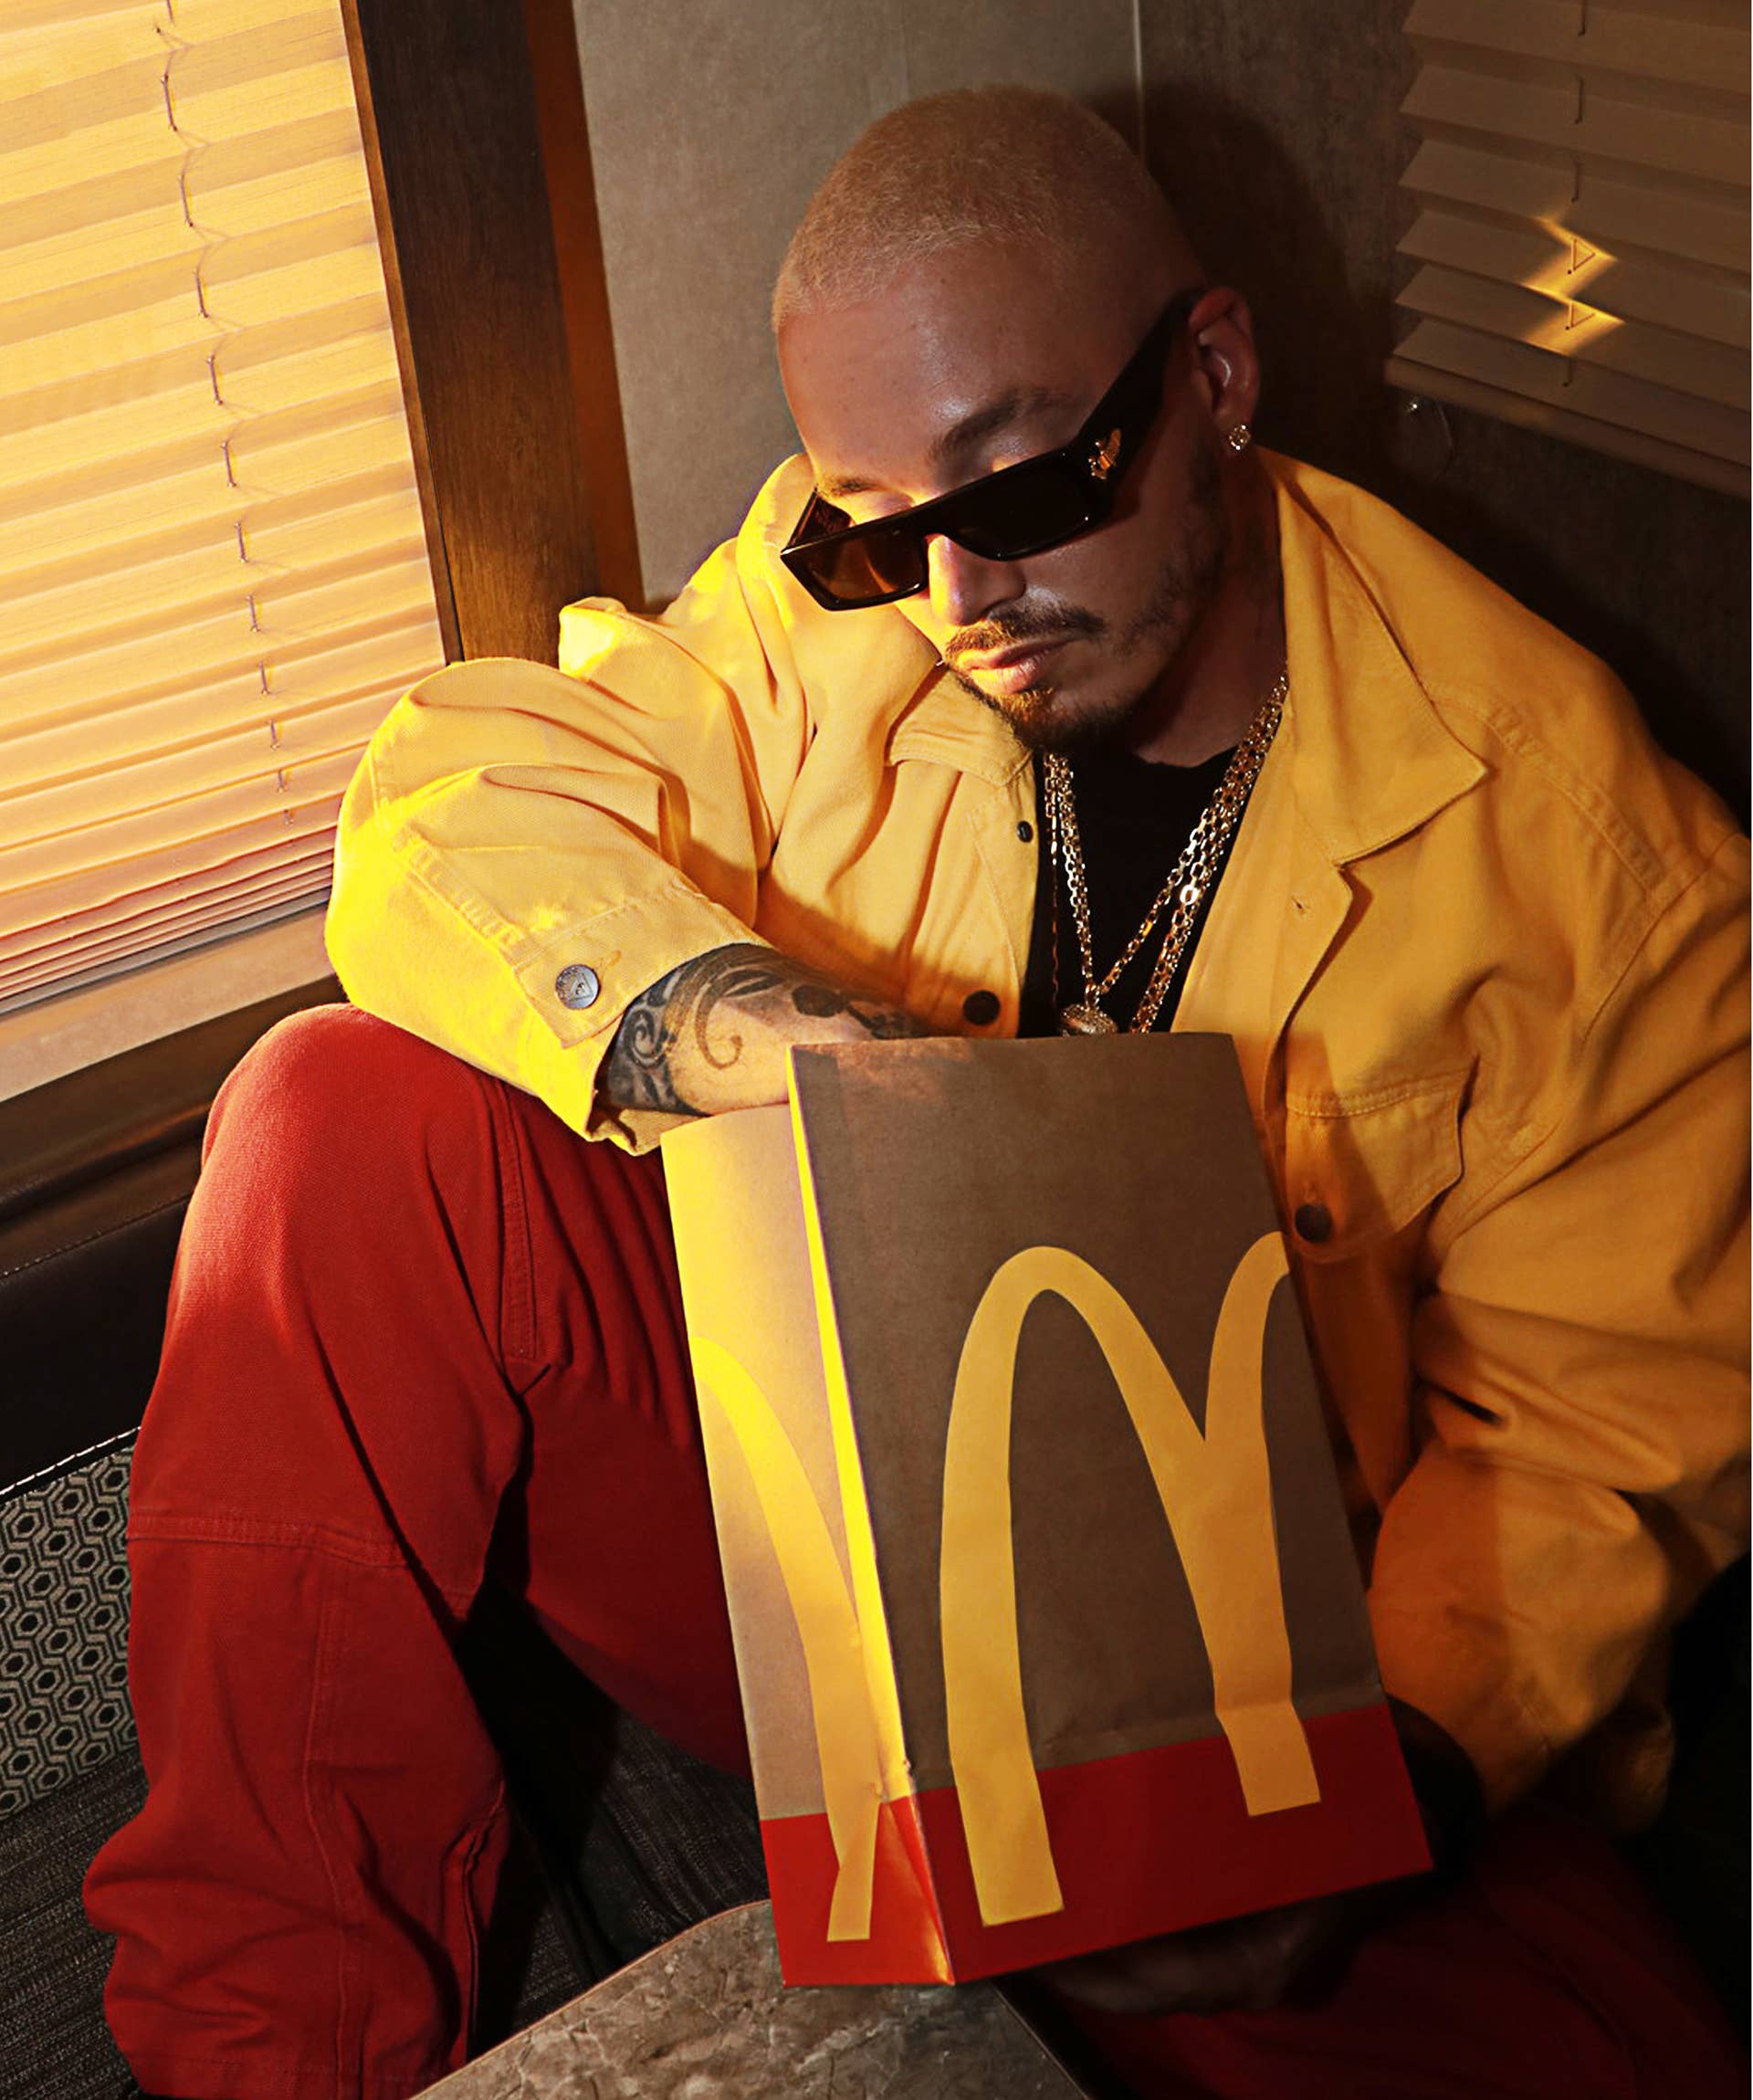 J Balvin Is Getting His Own McDonald's Meal & Twitter Is Going Wild